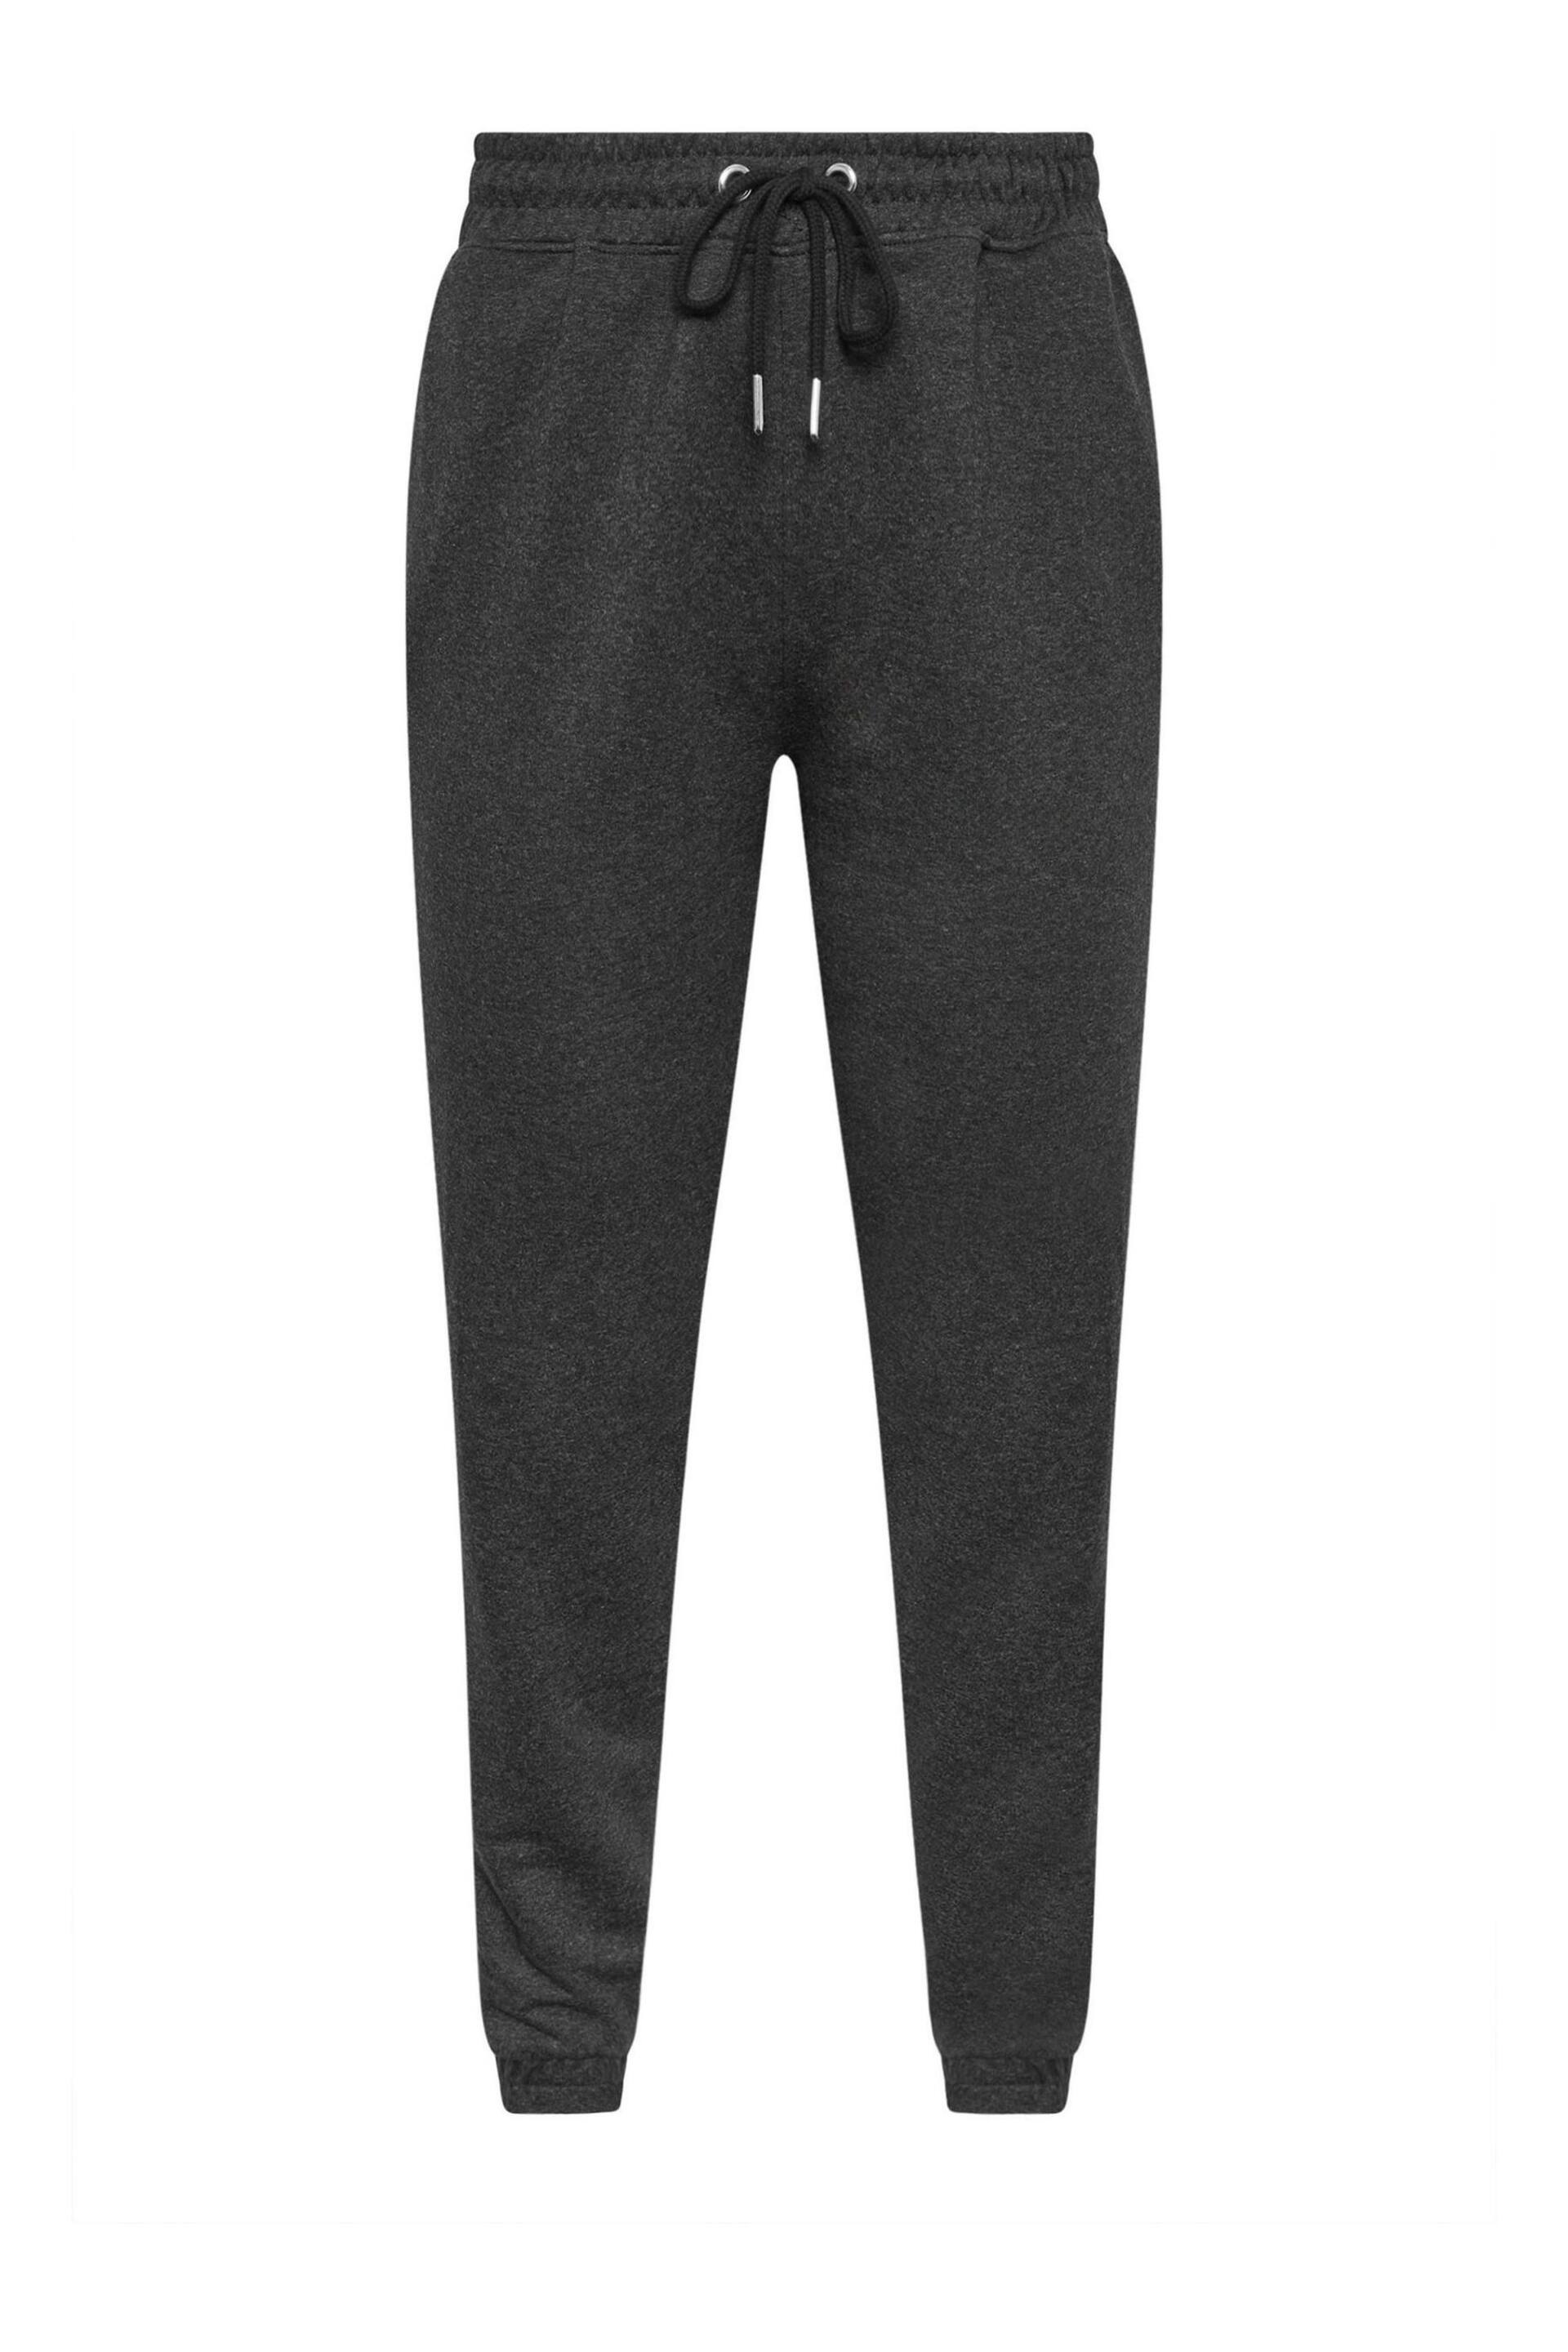 Yours Curve Grey Elasticated Stretch Joggers - Image 5 of 5